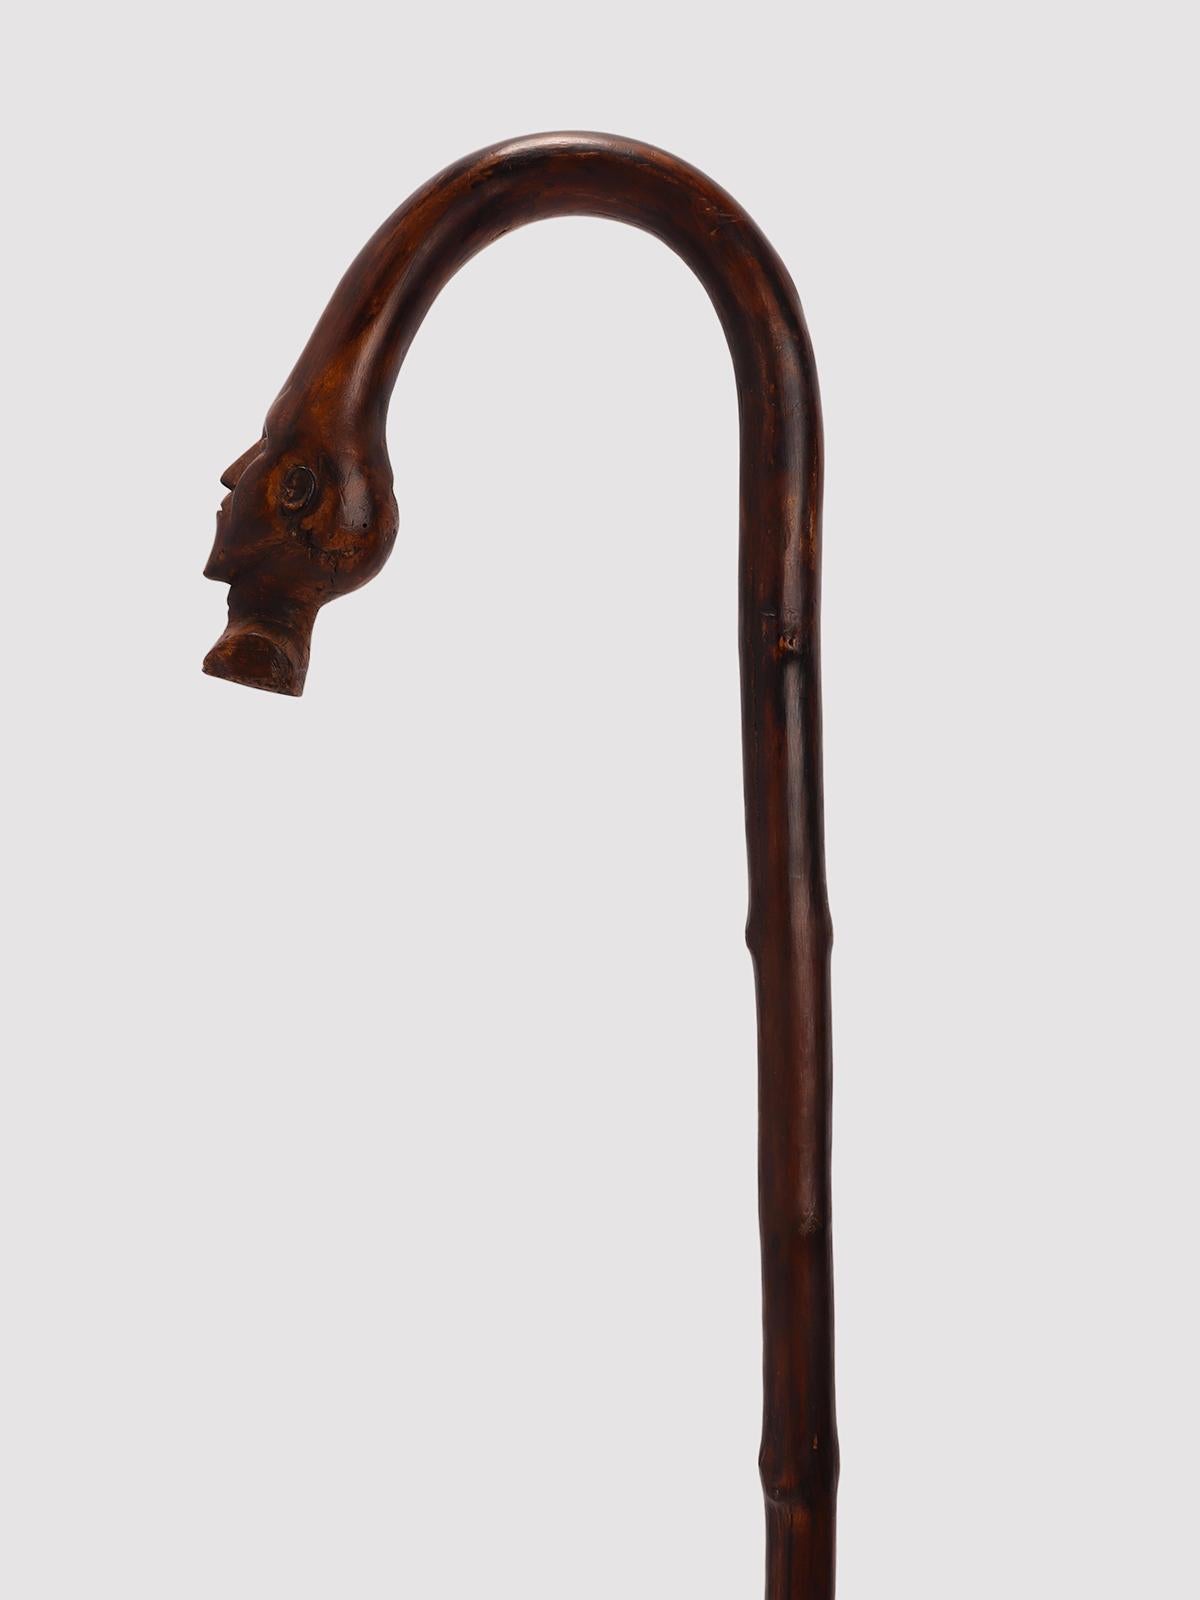 Folk art walking stick: one piece of fruitwood depicting the head of a man. United States of America circa 1880.